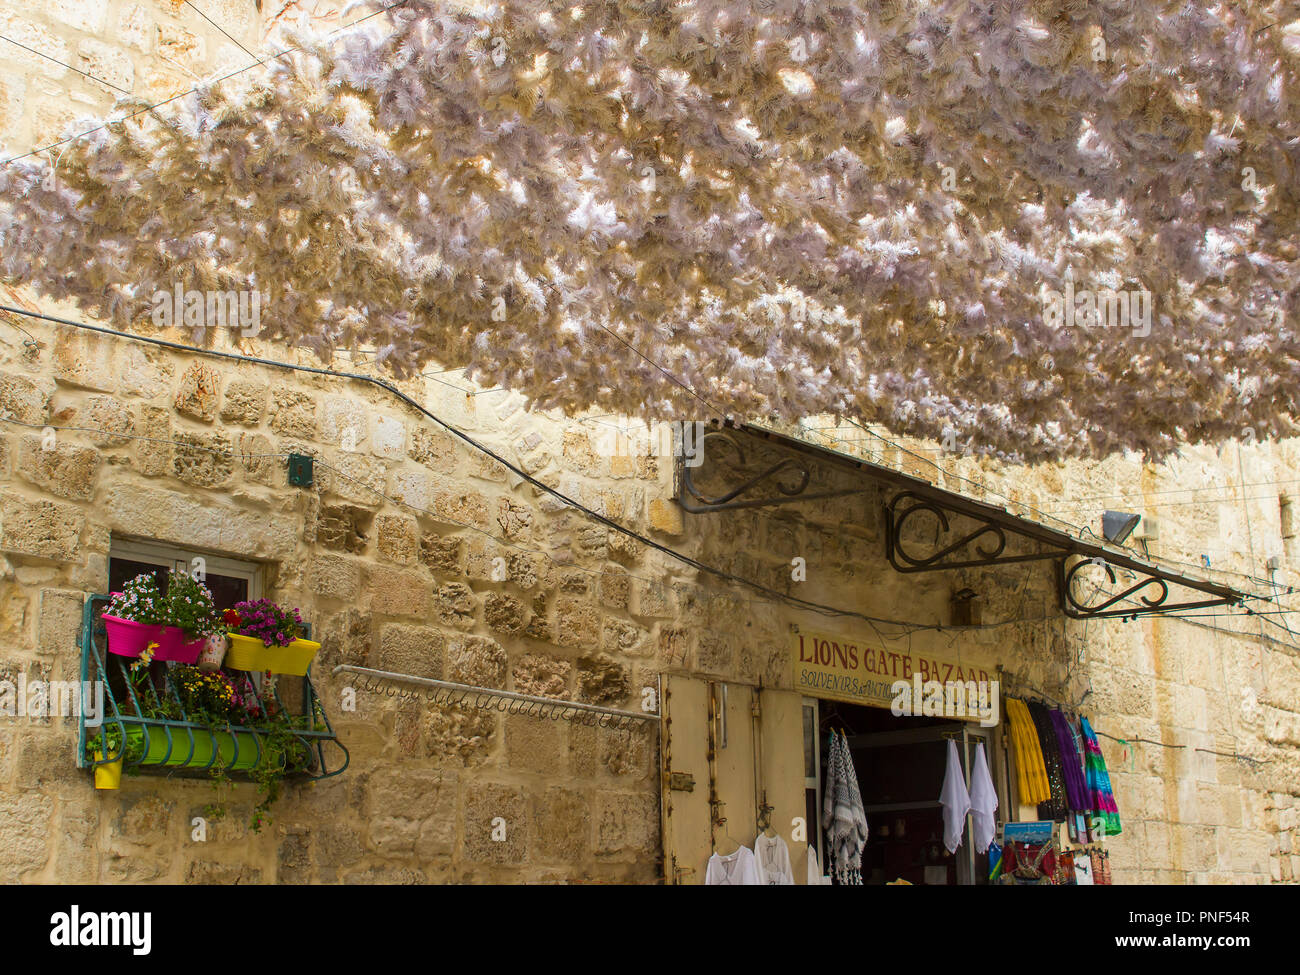 10 May 2018 A small shop doorway under a large feathery sun canopy suspended across the street in the old city Lions Gate Street Jerusalem, Israel. Stock Photo